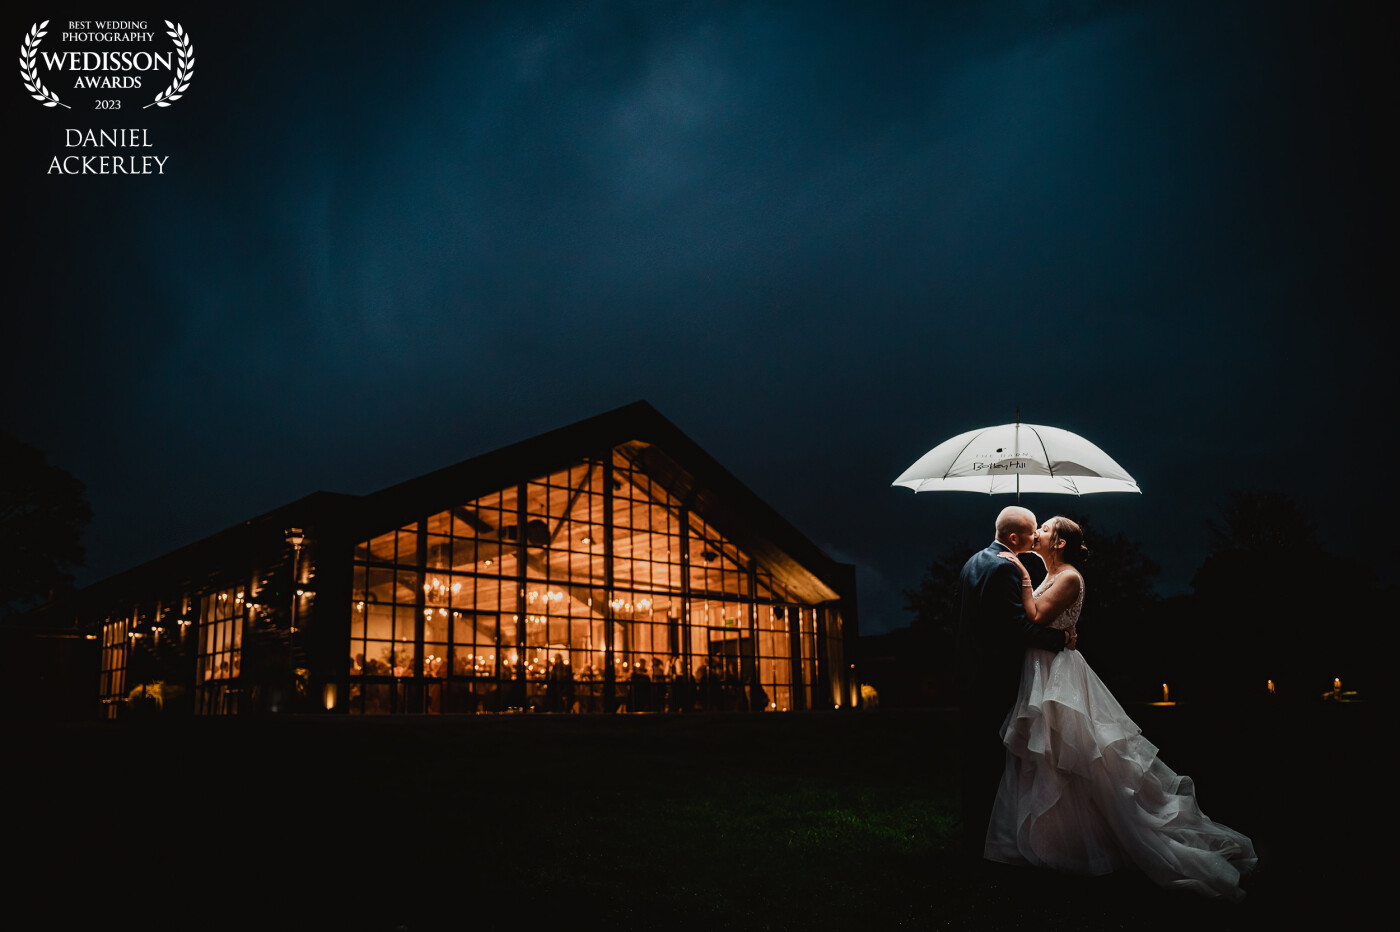 I had the immense pleasure of being asked by fellow photographer Louise to capture her wedding to Paul at the stunning Botley Hill Barn, however the weather was awful all day, but it did make for a really stunning moody evening sky which we made the most of for this nighttime portrait!